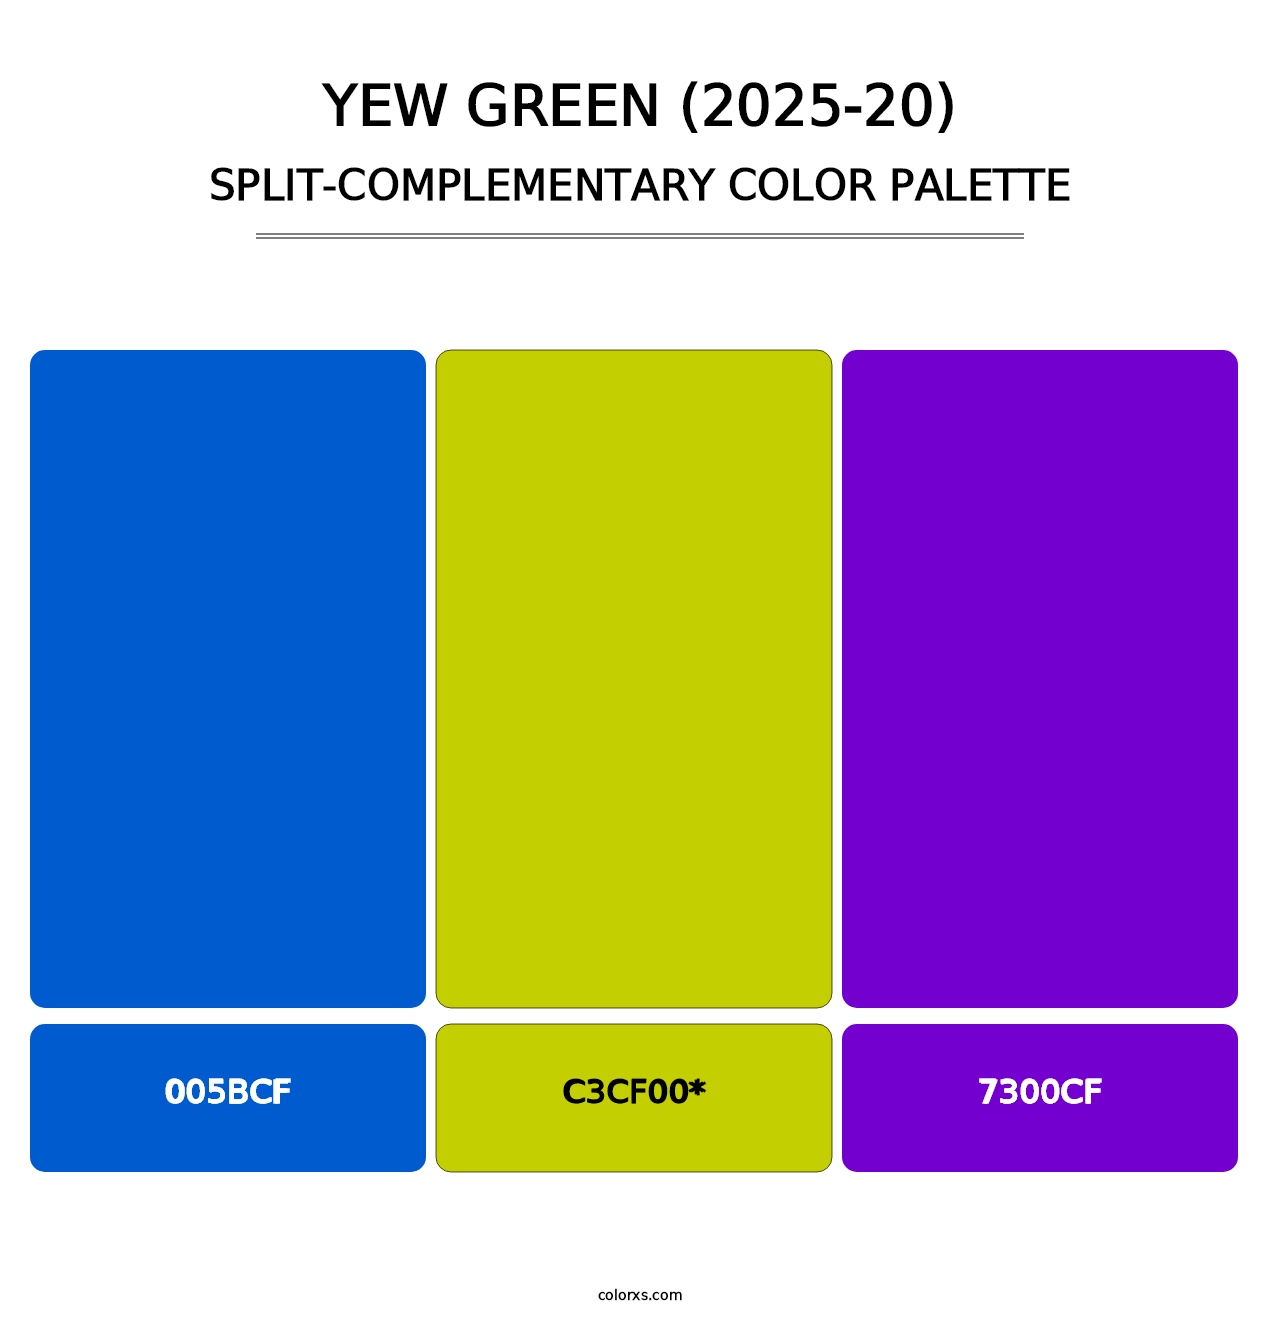 Yew Green (2025-20) - Split-Complementary Color Palette